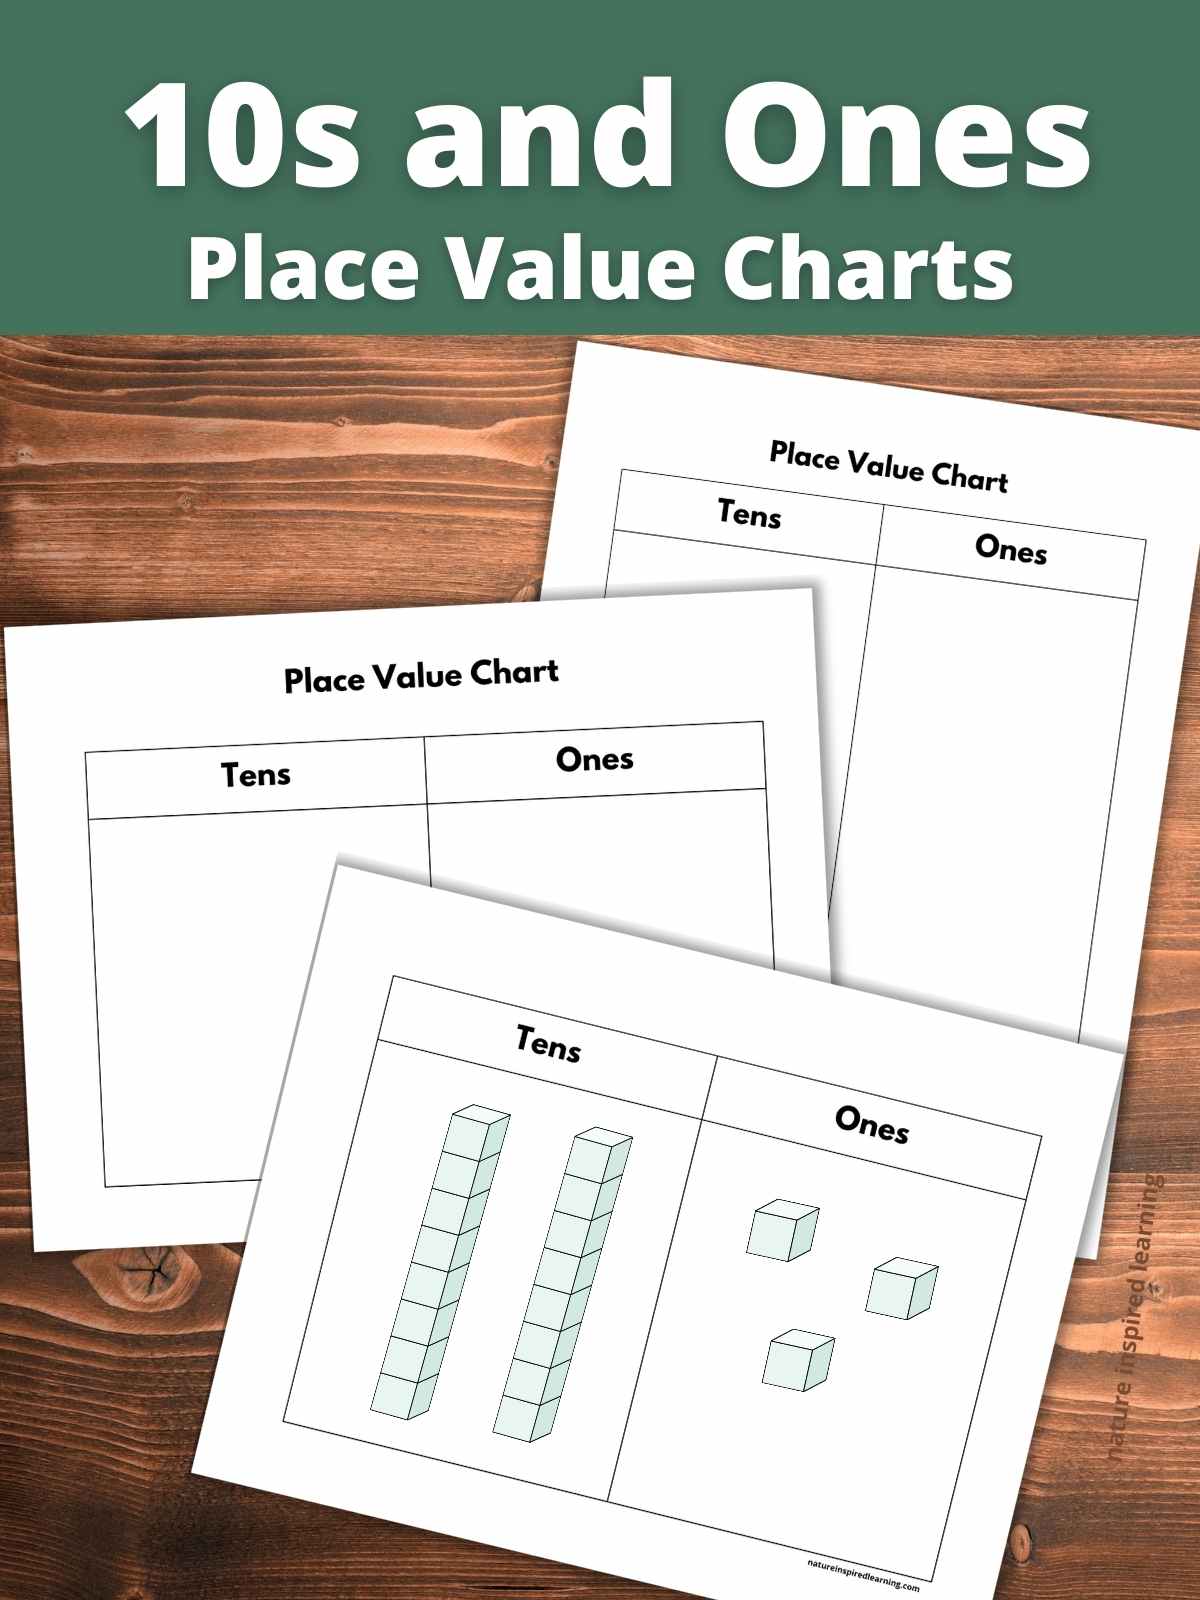 three basic black and white tens and ones place value charts overlapping on a wooden background. Two tens cubes and three ones cubes on one printable. Text overlay across the top over a green background